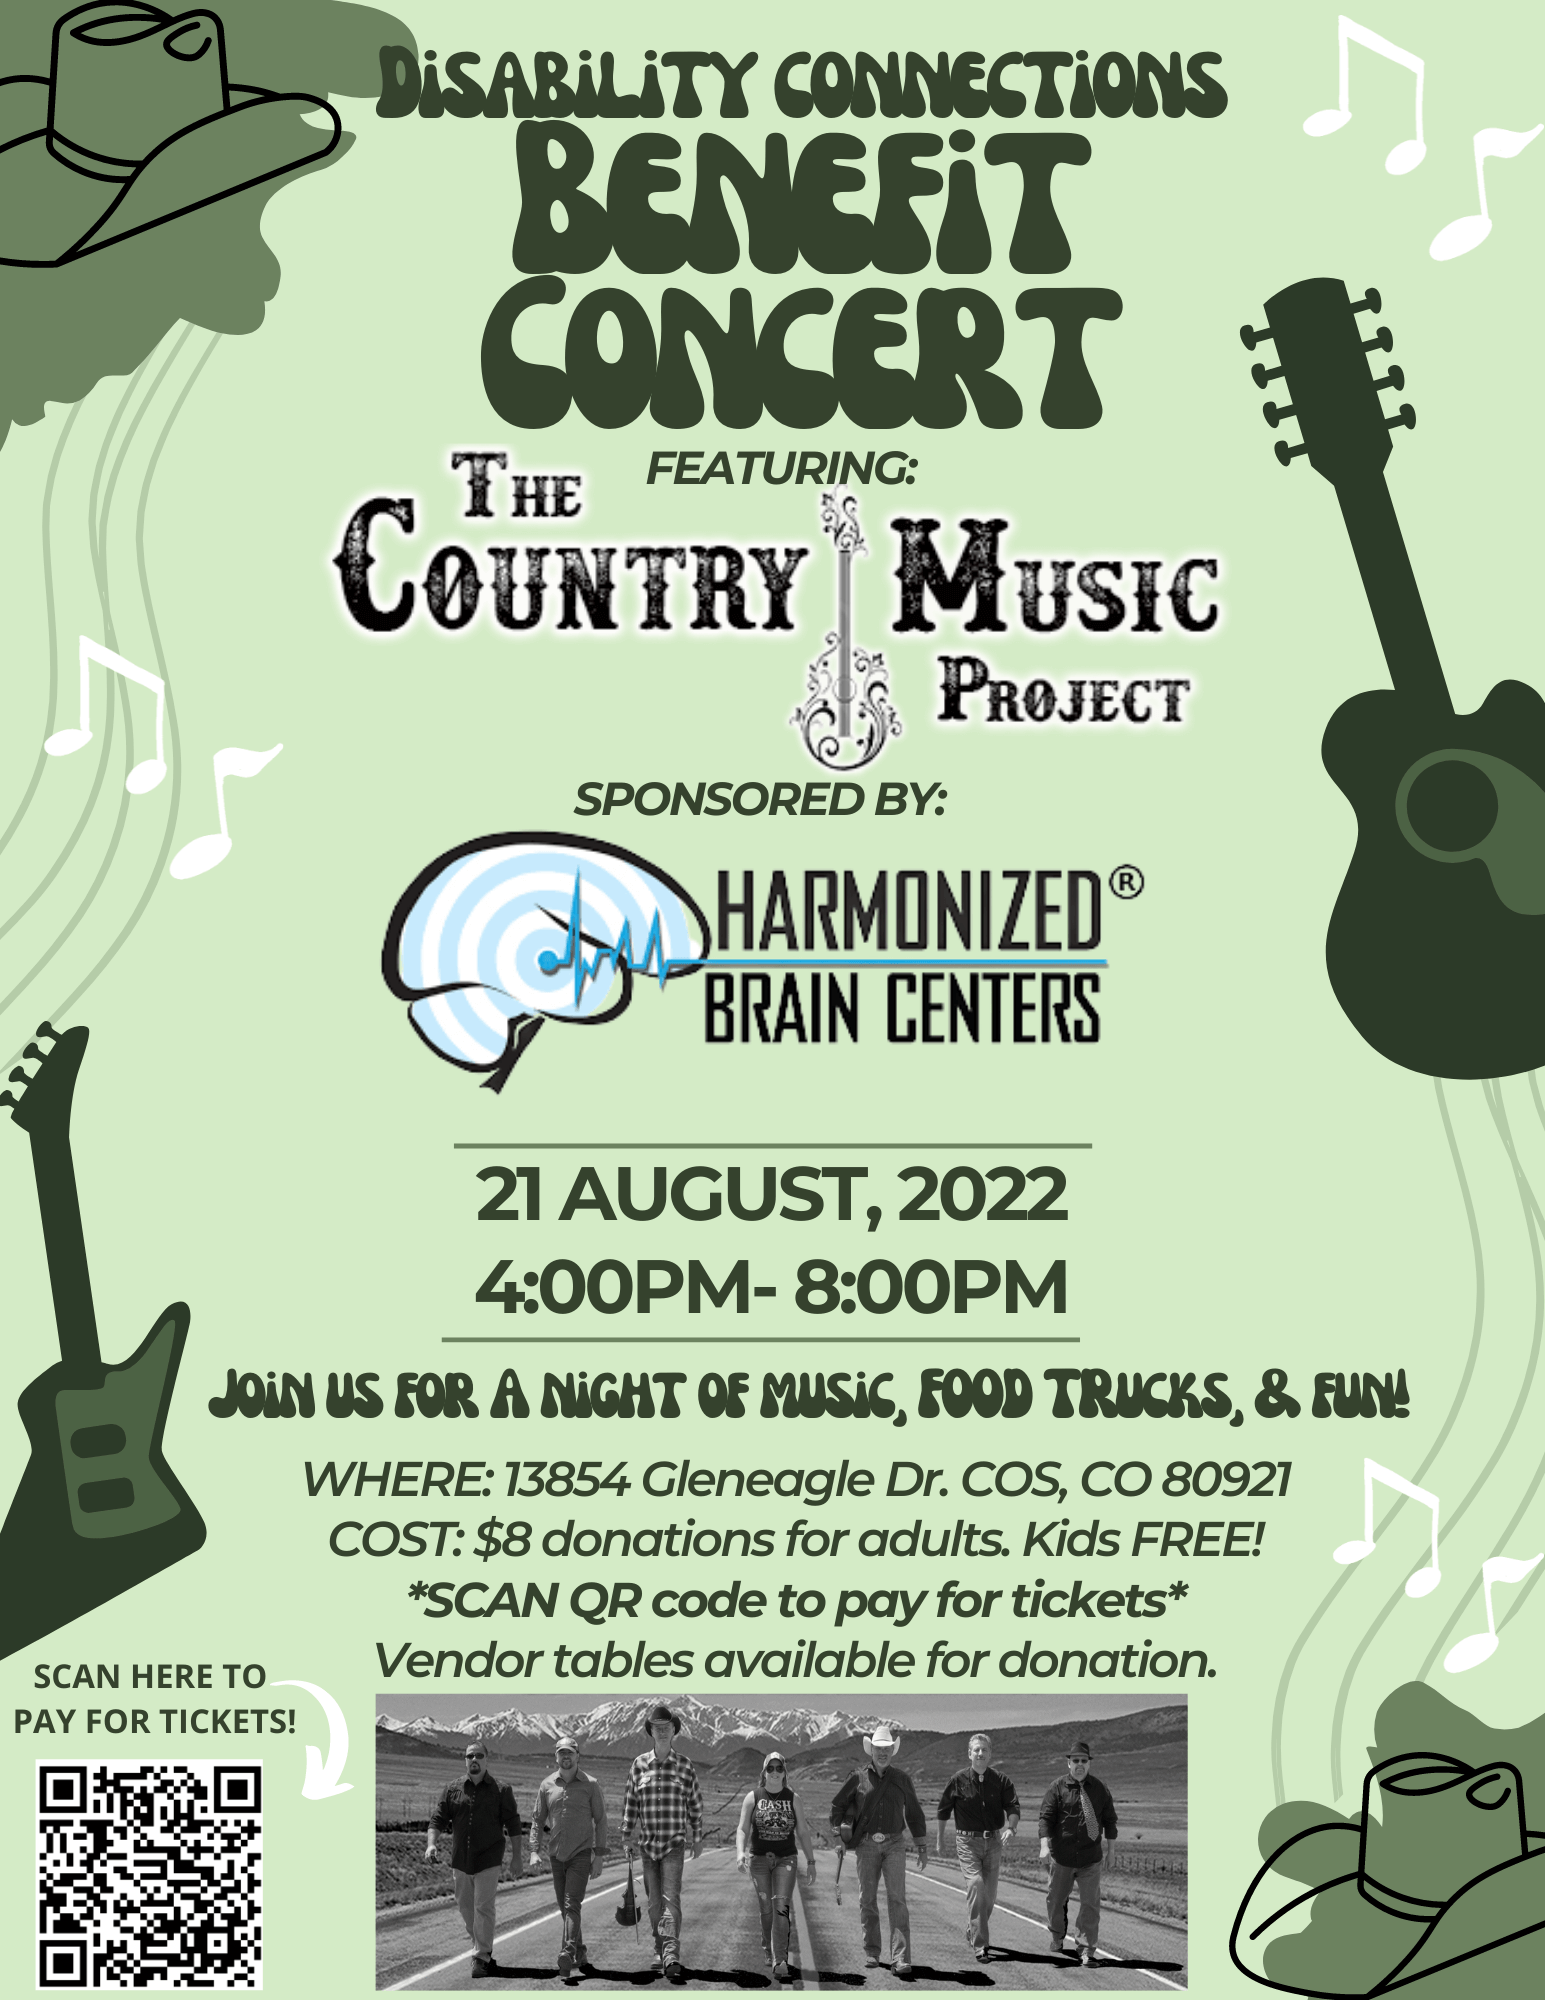 A flyer with information about the Disability Connections Benefit Concert.